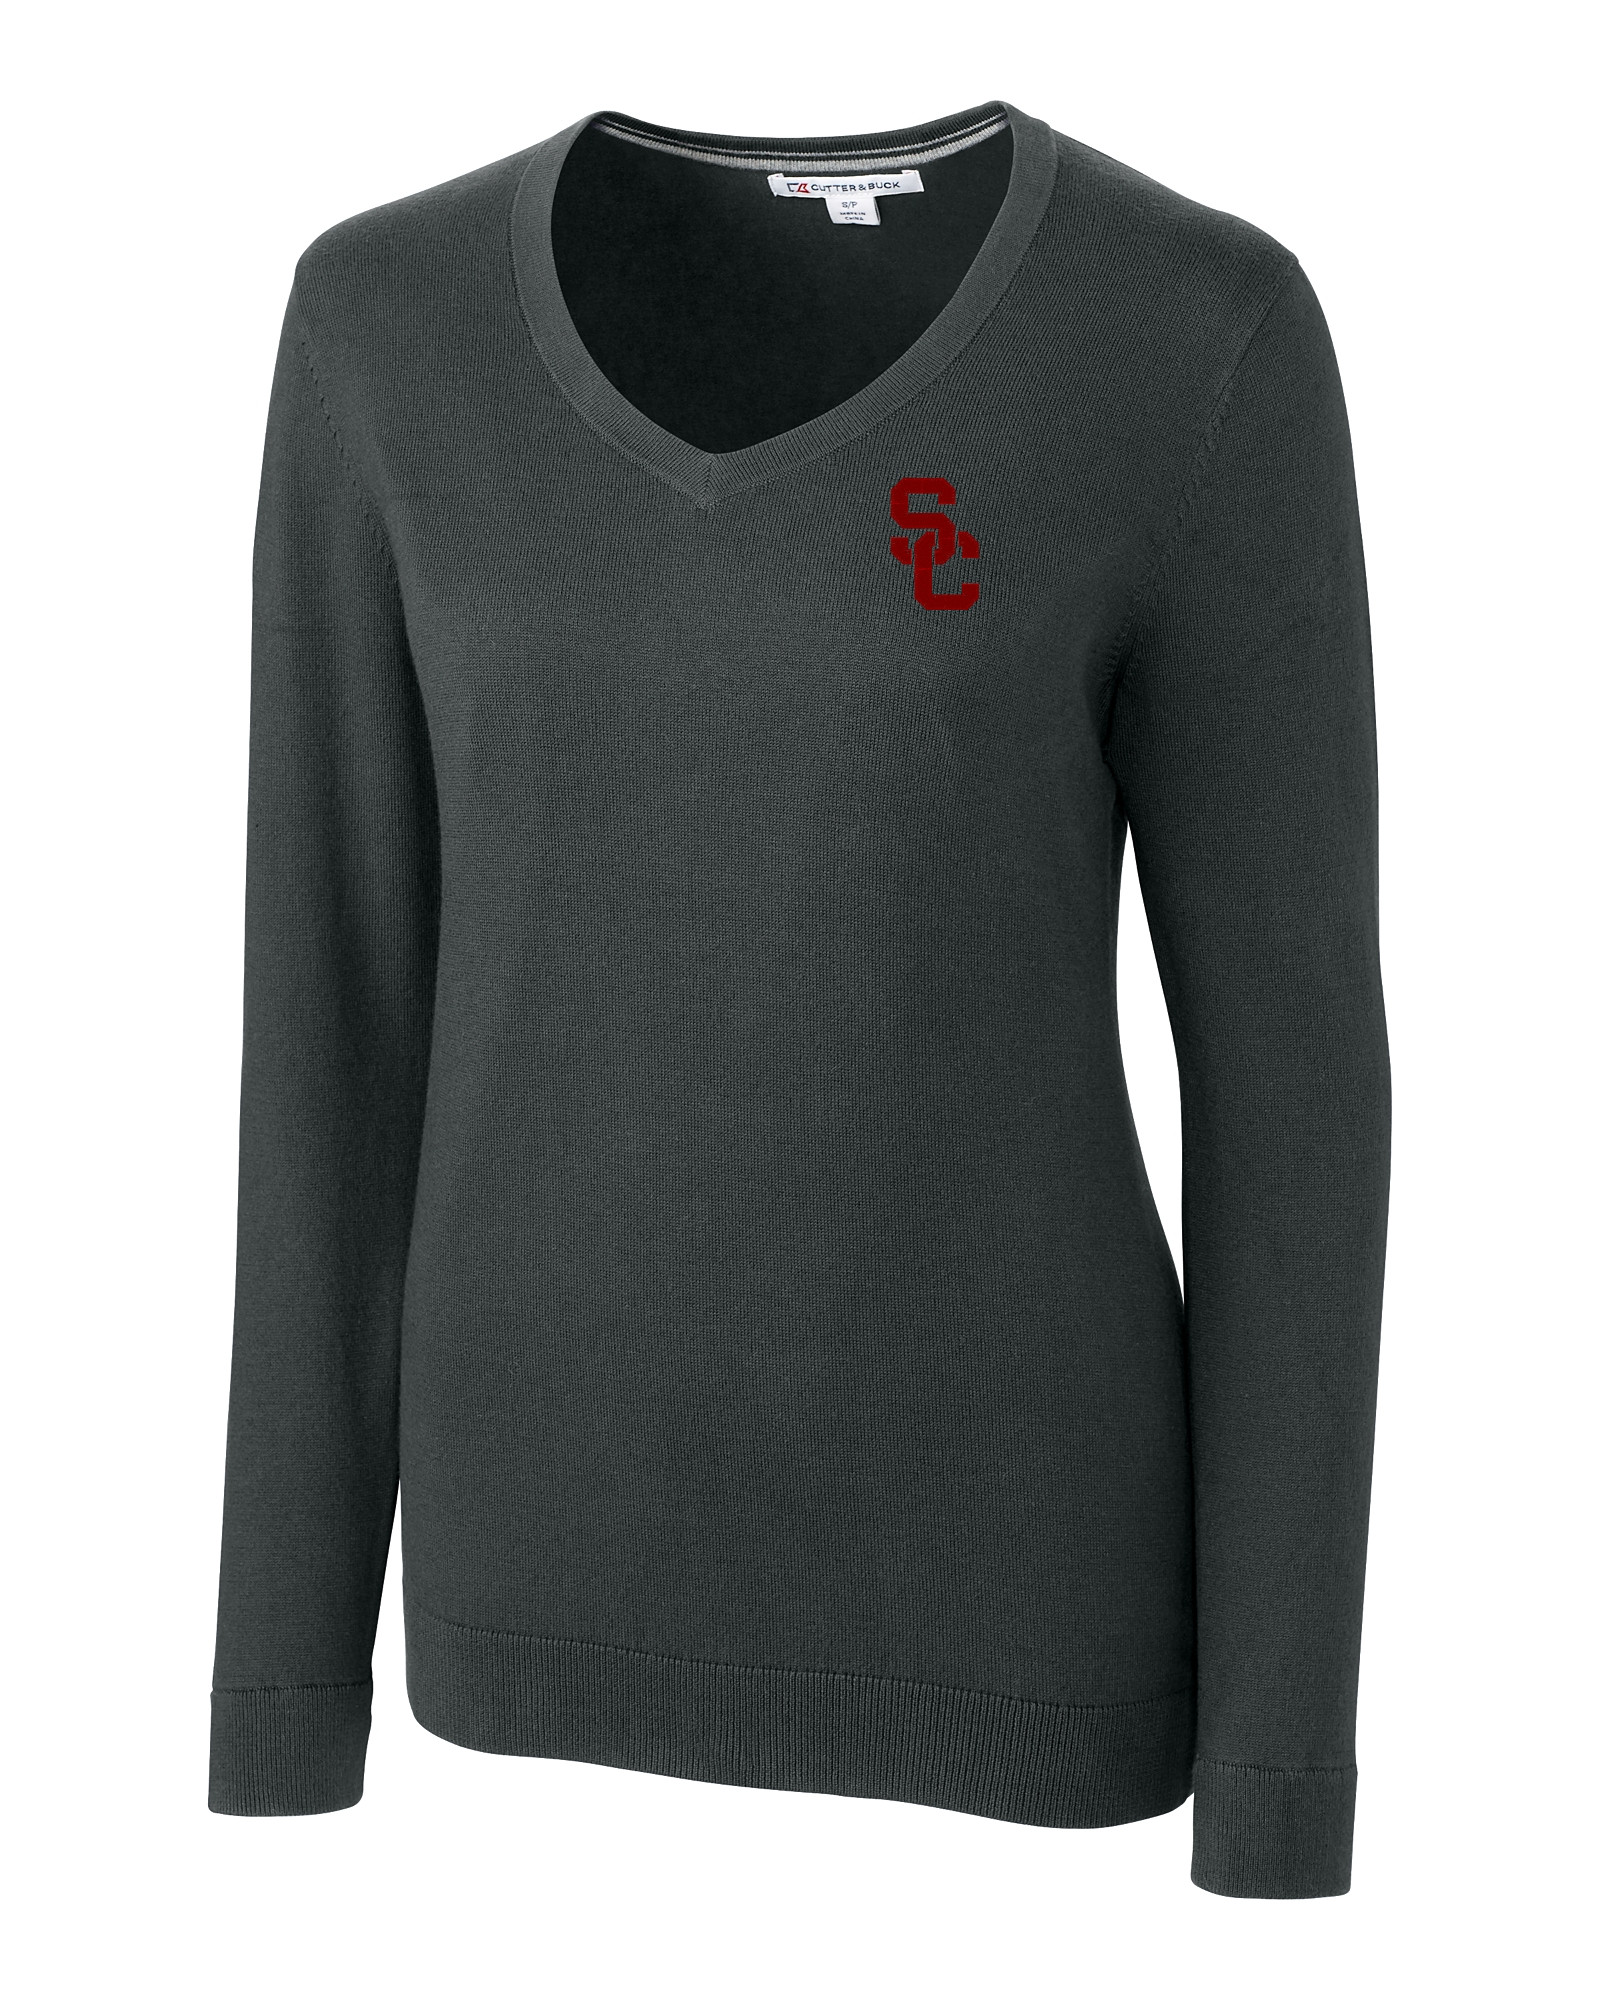 Women's V-neck Layered Pullover Sweater in Dark Charcoal